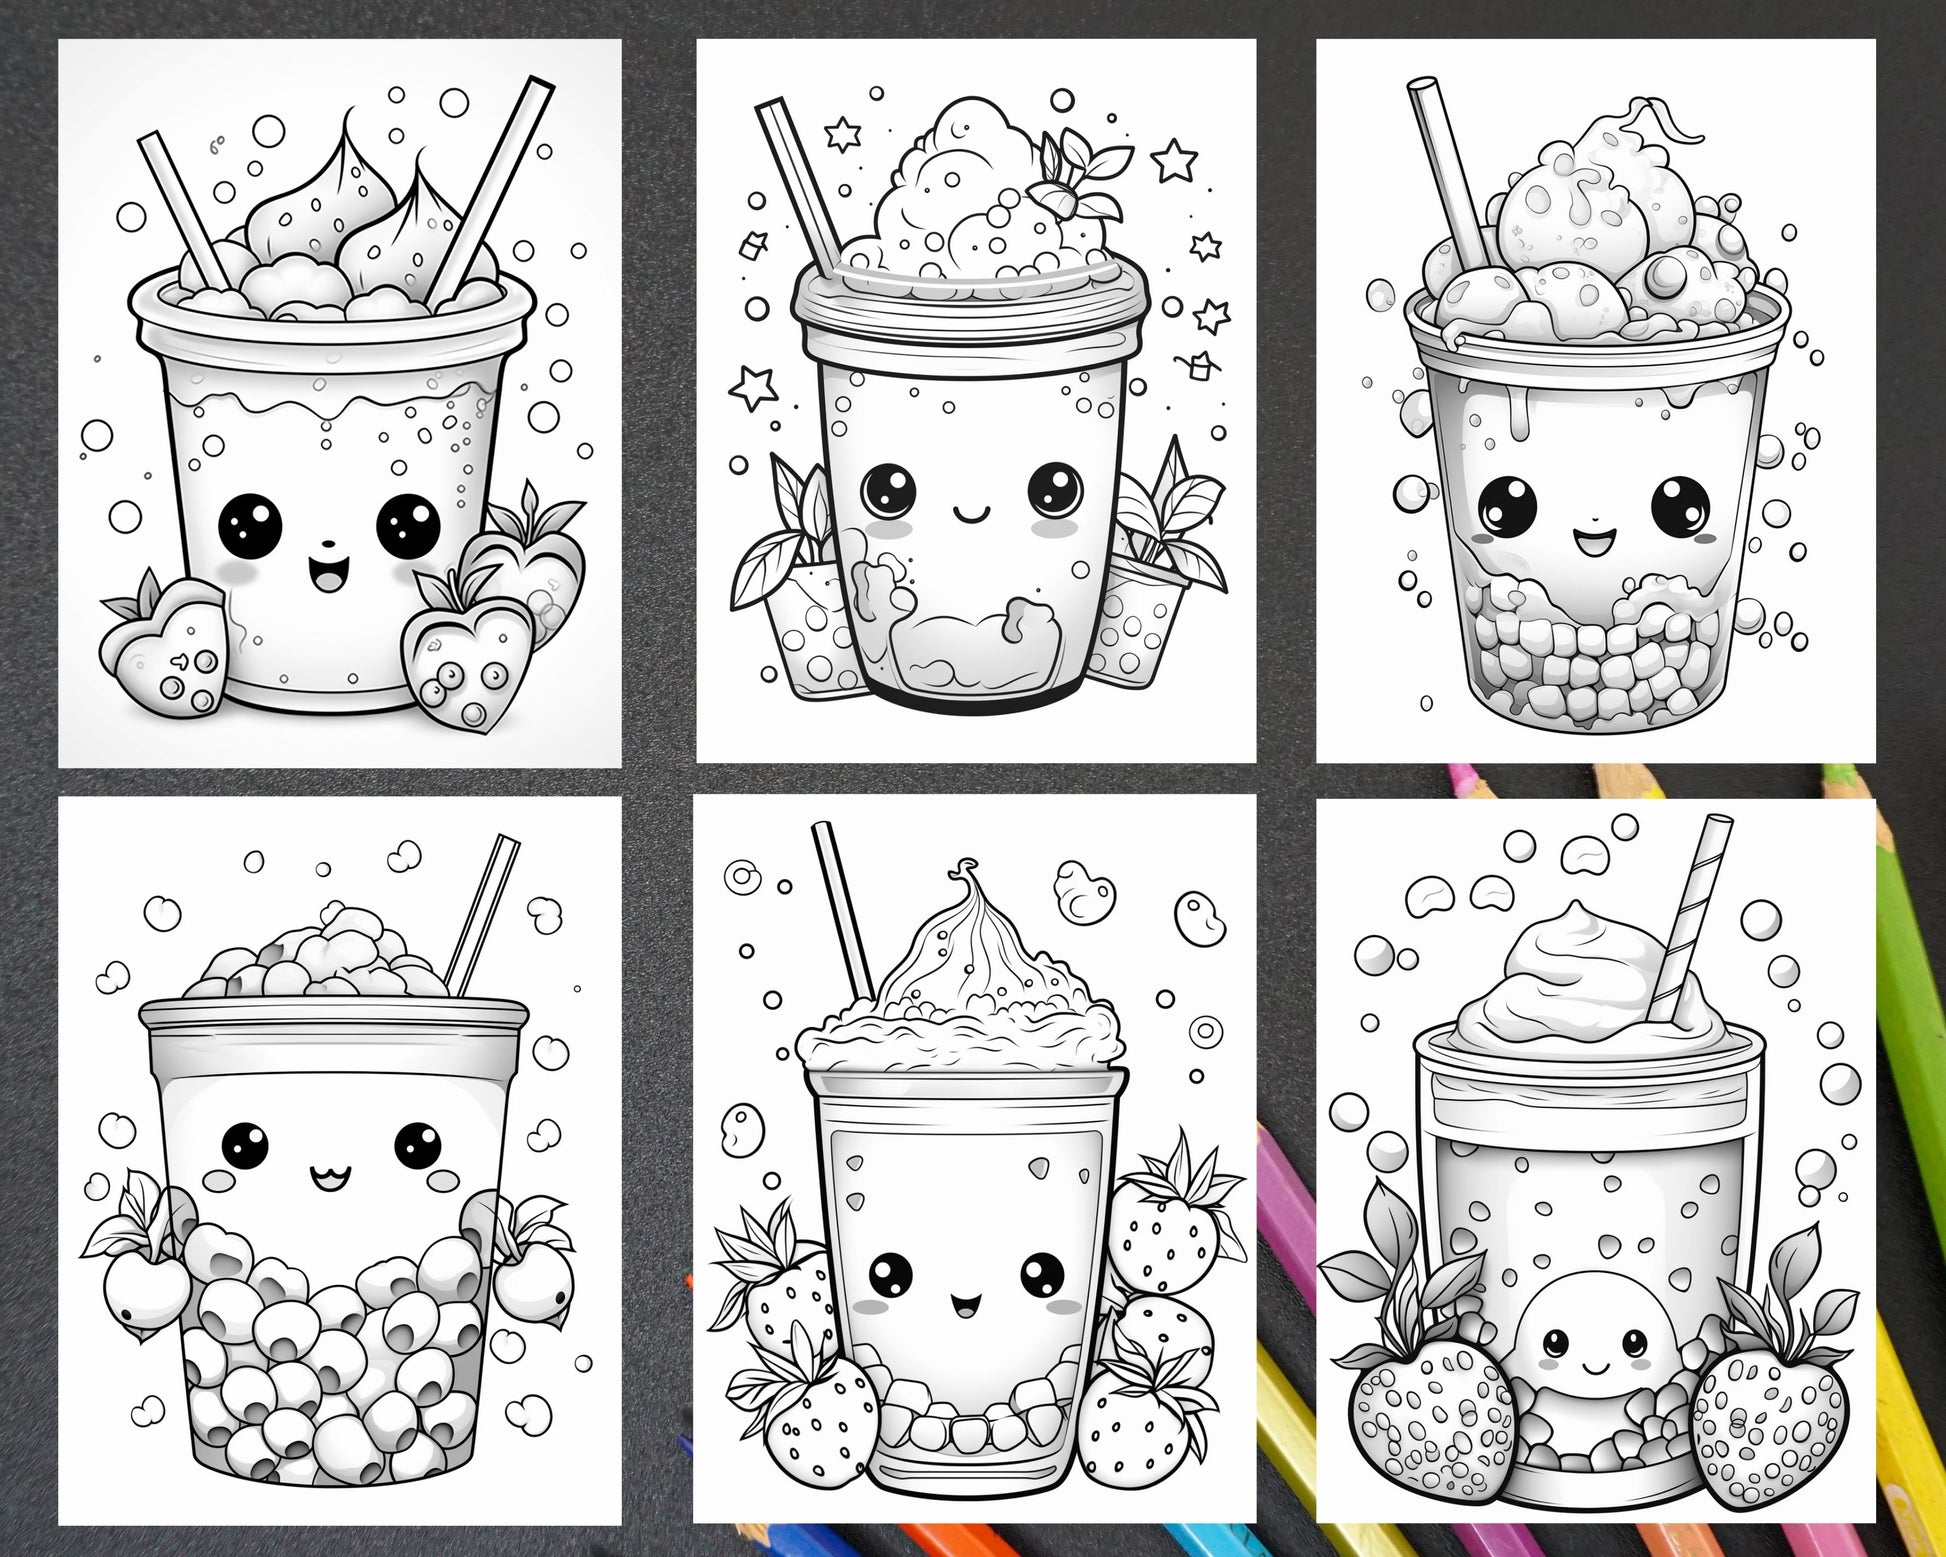 Cute kawaii boba tea grayscale coloring pages for adults and kids â coloring